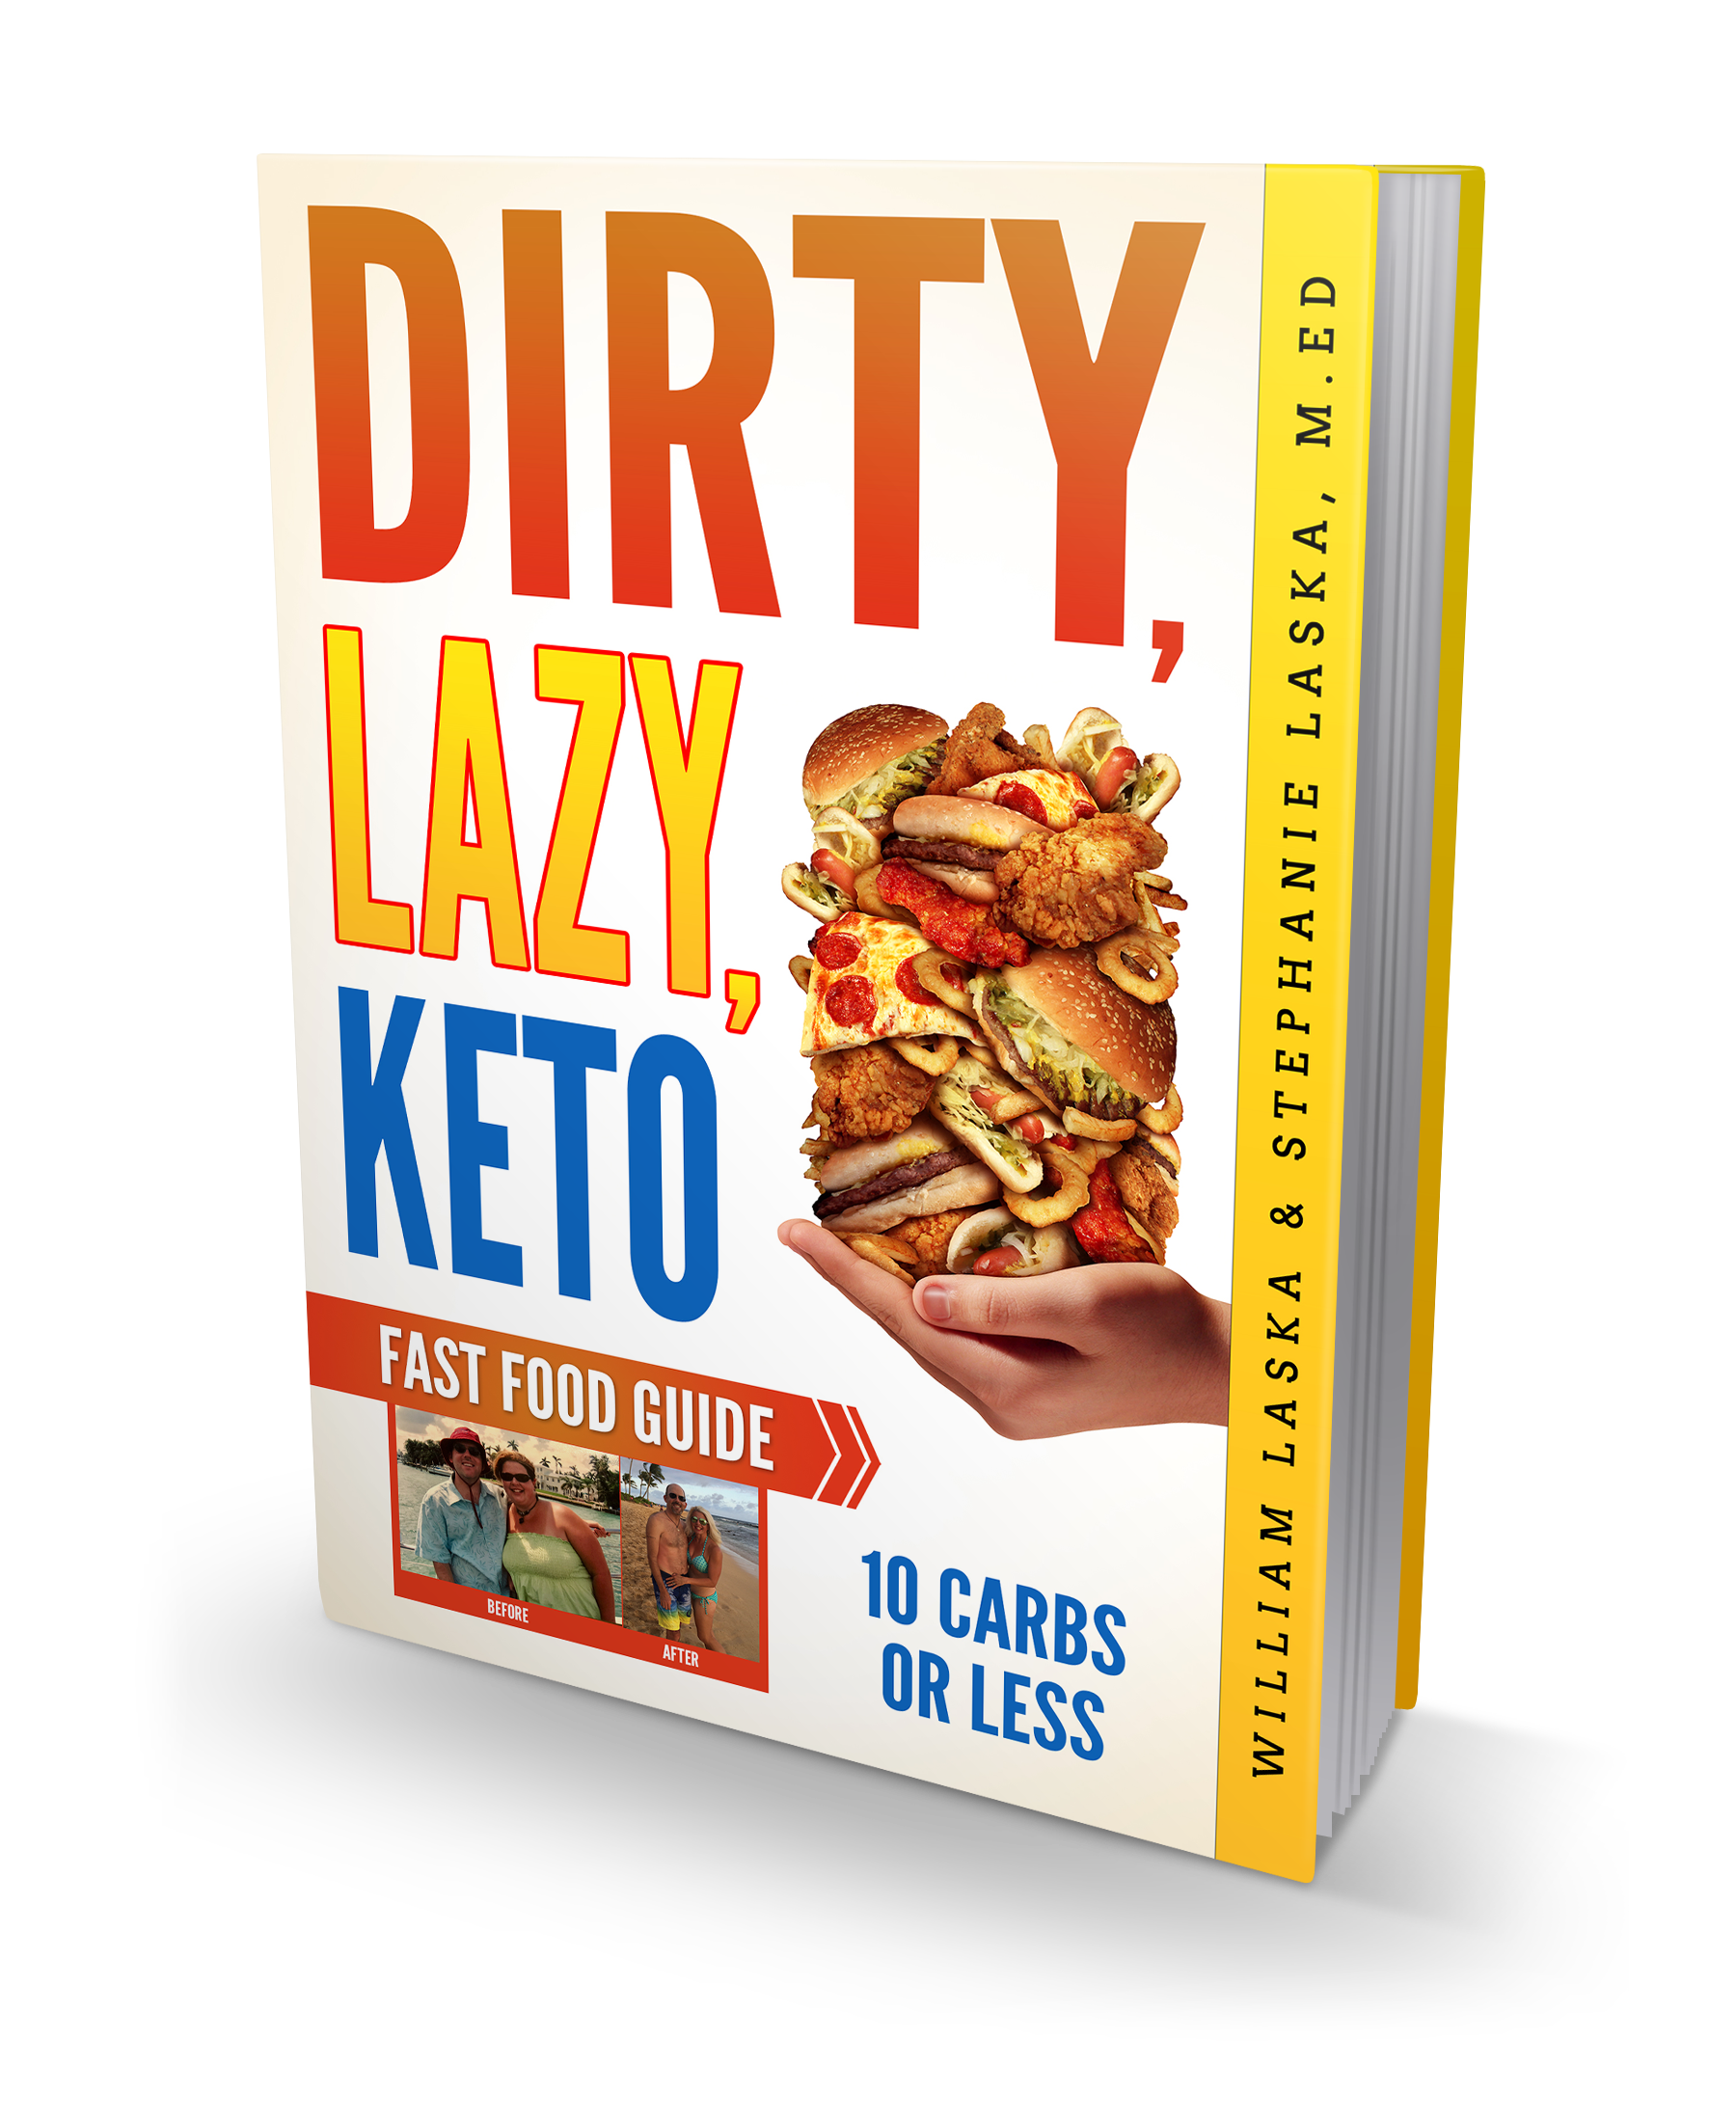 FREE: DIRTY, LAZY, KETO Fast Food Guide: 10 Carbs or Less by William Laska